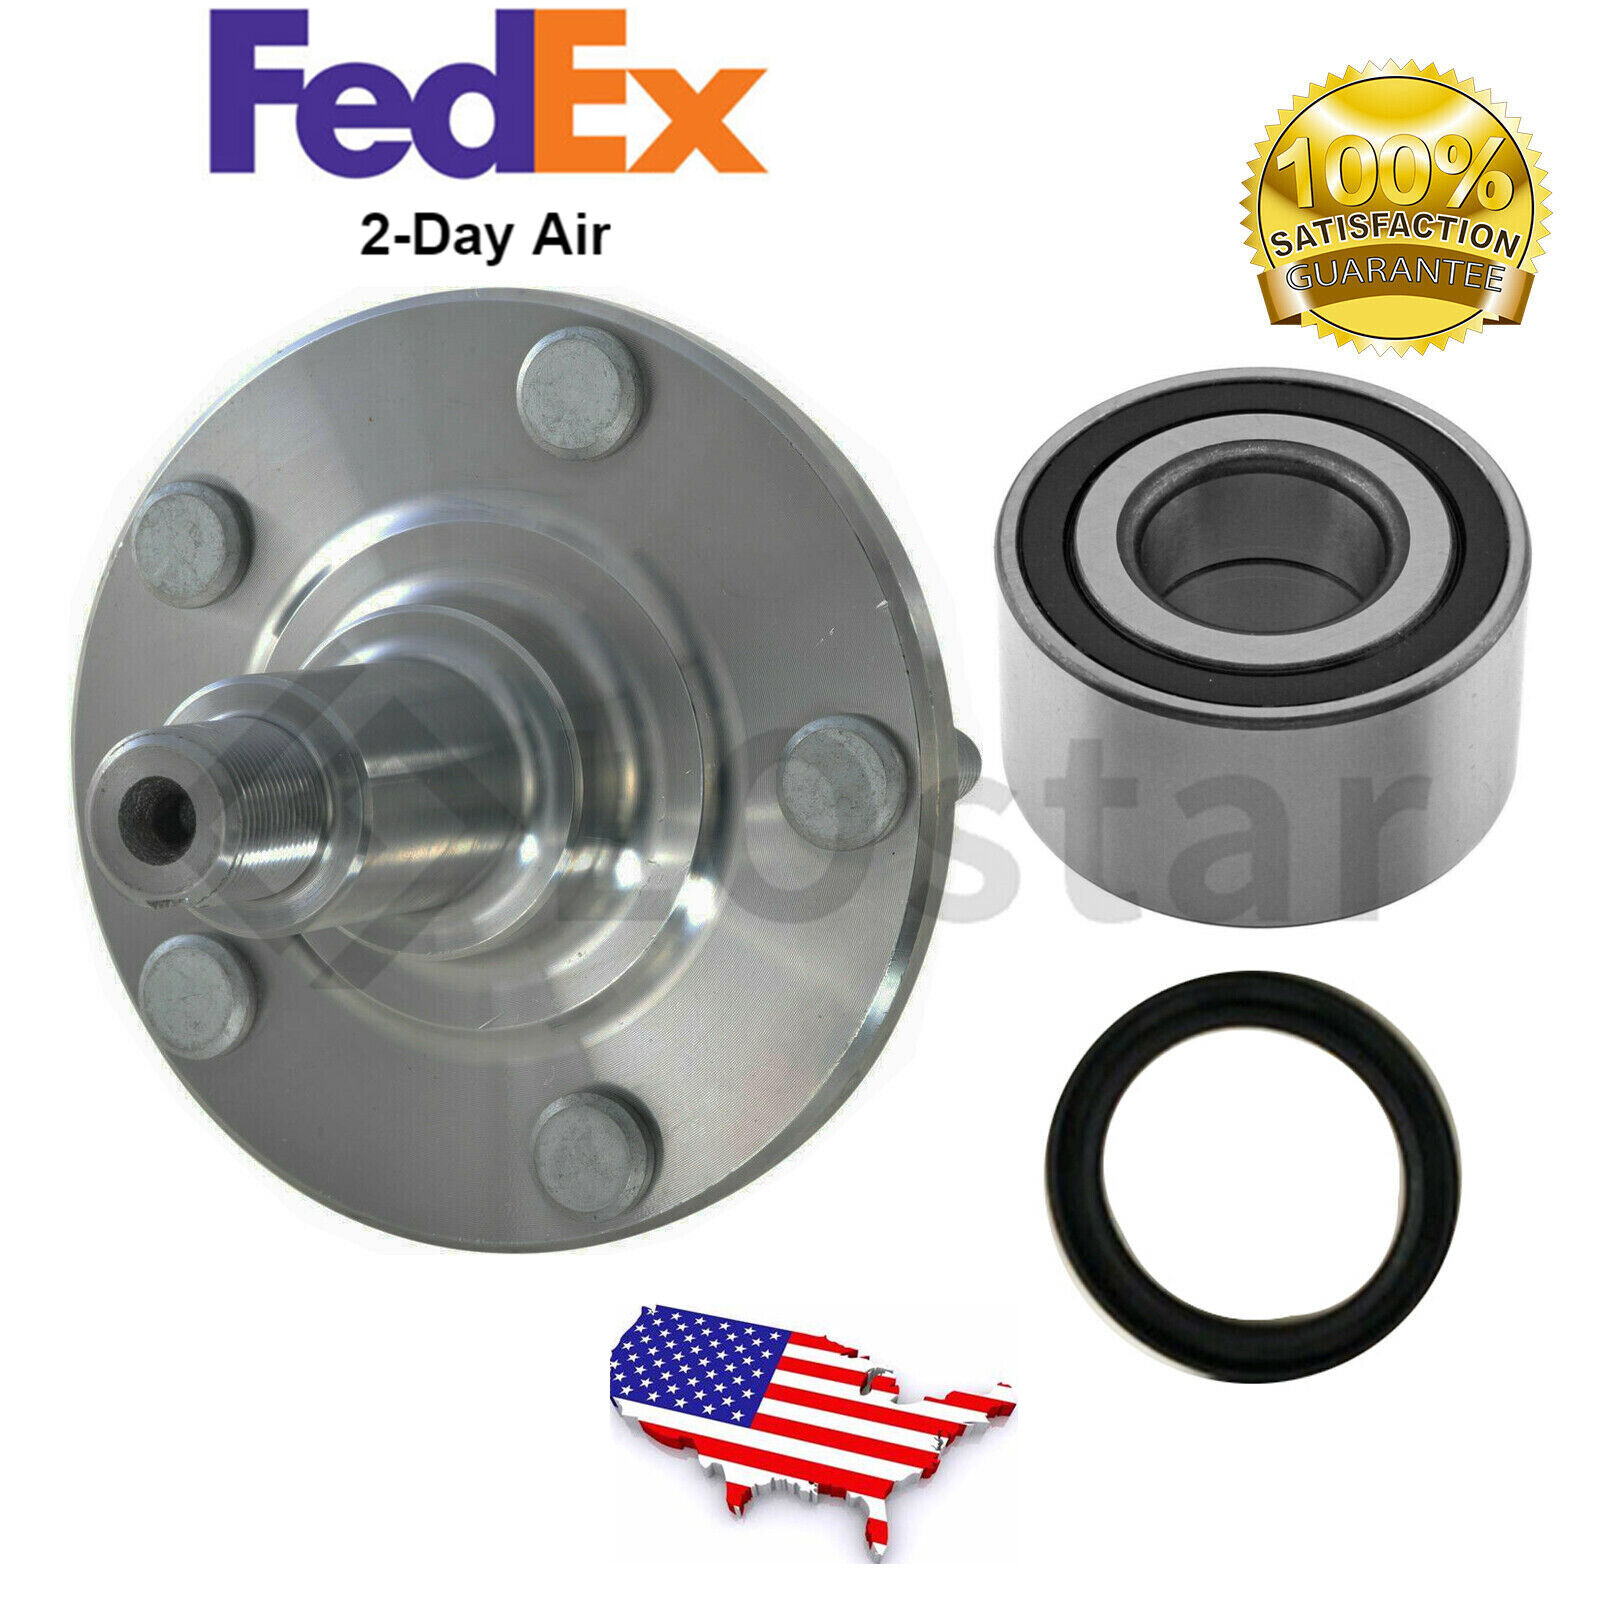 Front Wheel Hub & Bearing Assembly Fits Lexus SC430 GS300 GS430 W/ Seal